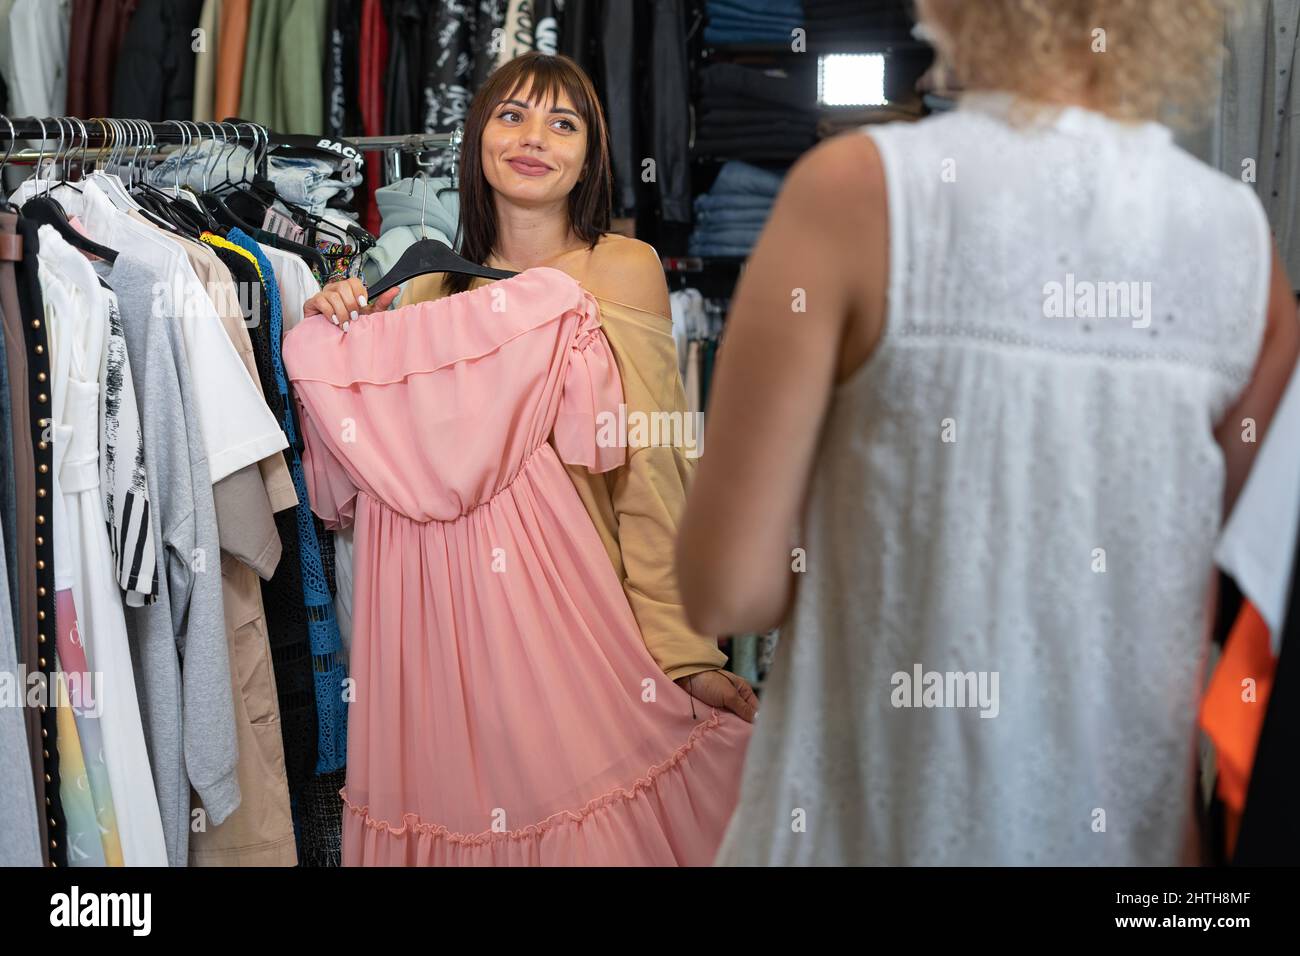 brunette girl trying on a dress in a clothing store, her friend advising, shopping in a mall, women's clothing showroom, girlfriends shopaholic lifest Stock Photo